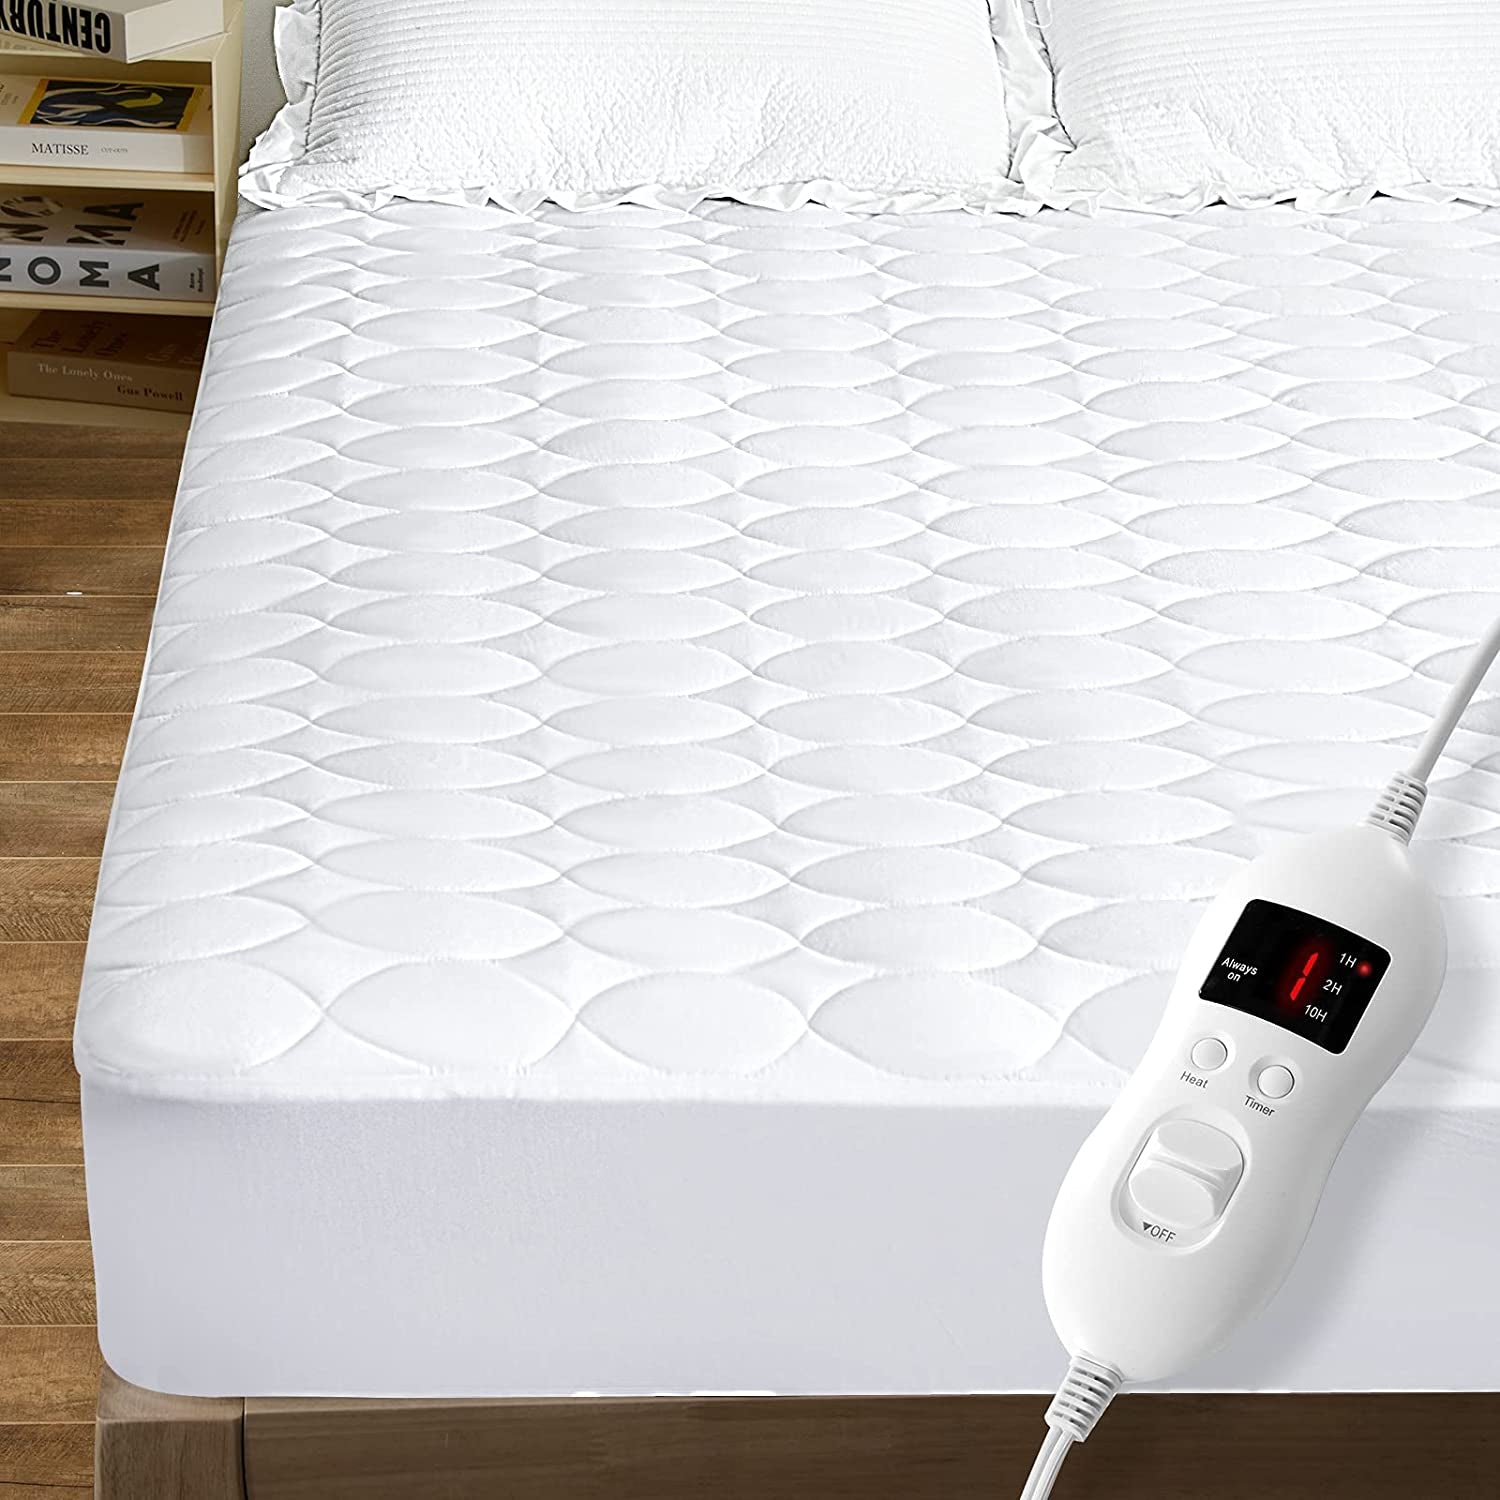 Heated Mattress Pad Queen Water-Resistant Electric Mattress Pad Bed Topper Stretches up 8-21" Deep Pocket